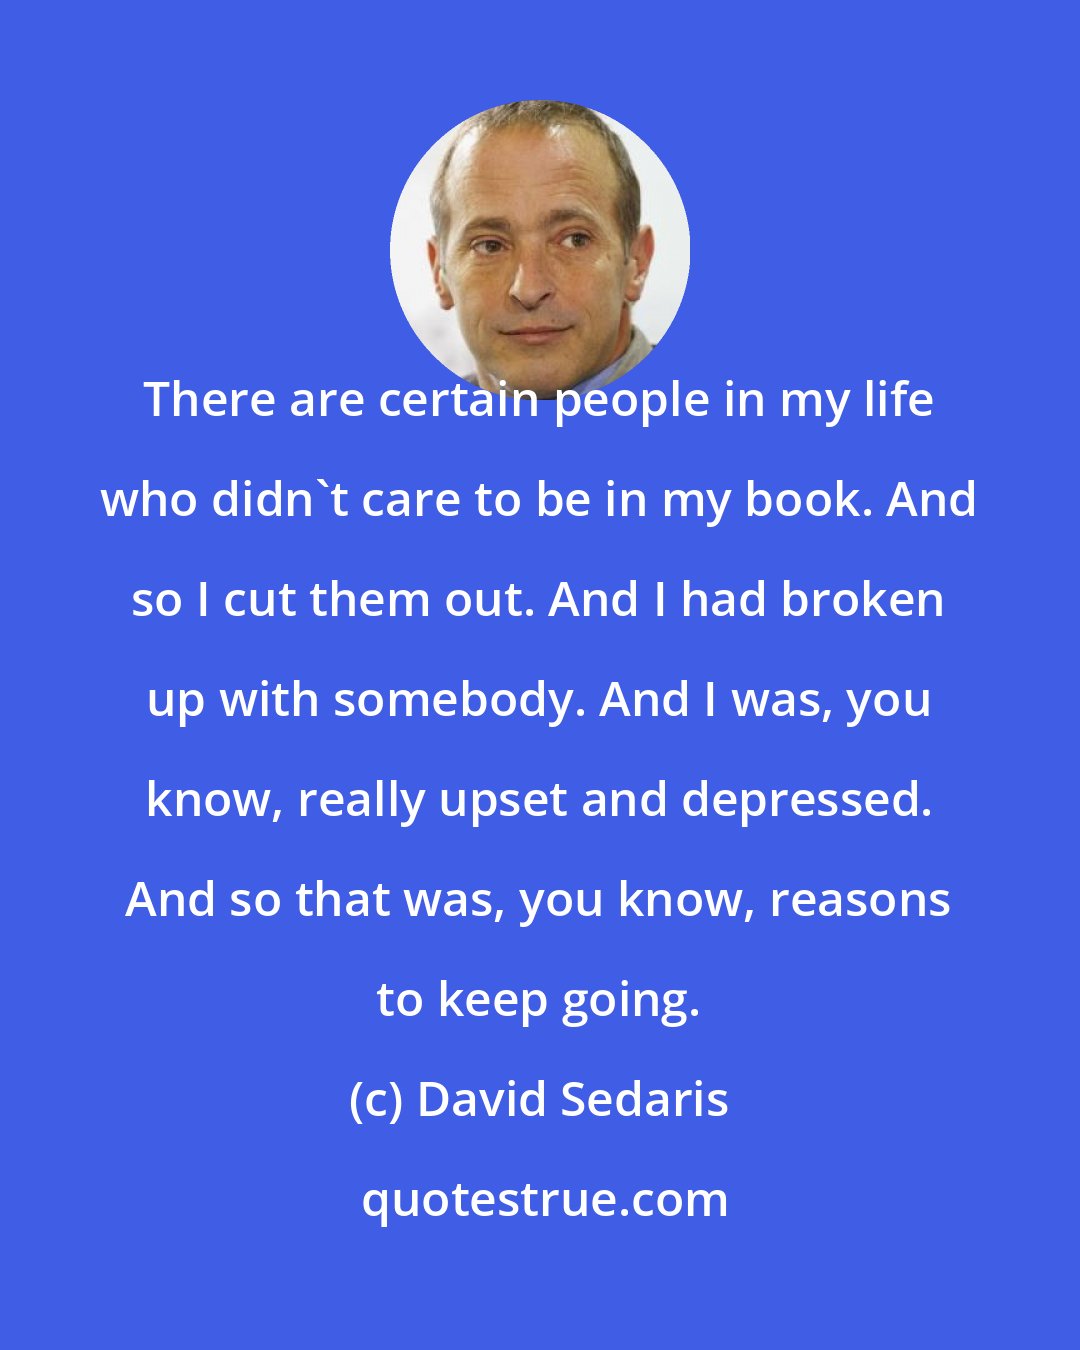 David Sedaris: There are certain people in my life who didn't care to be in my book. And so I cut them out. And I had broken up with somebody. And I was, you know, really upset and depressed. And so that was, you know, reasons to keep going.